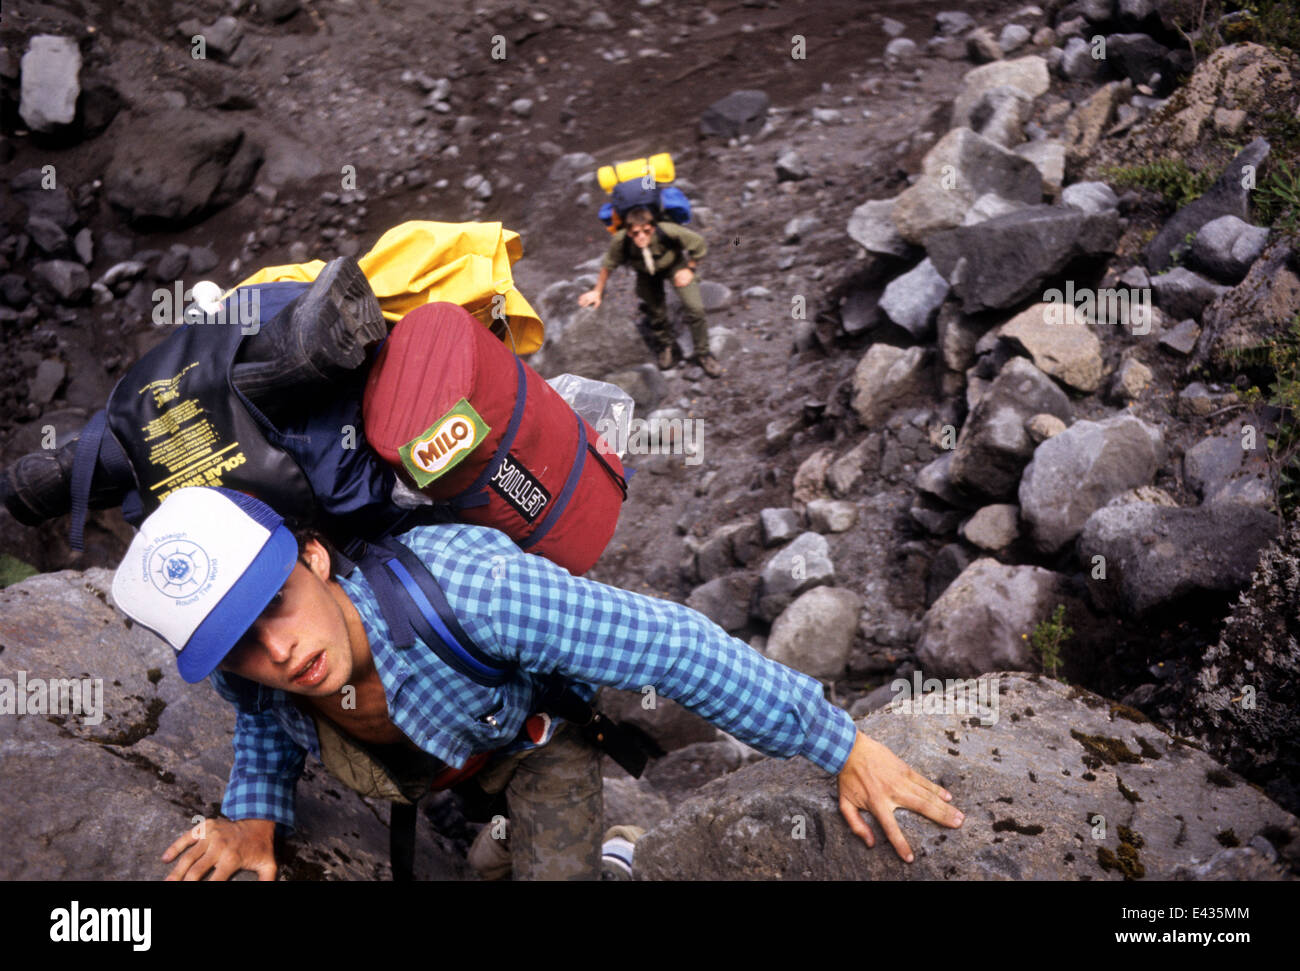 Operation Raleigh volunteers climbing in Chile 1989 now called Raleigh International Stock Photo